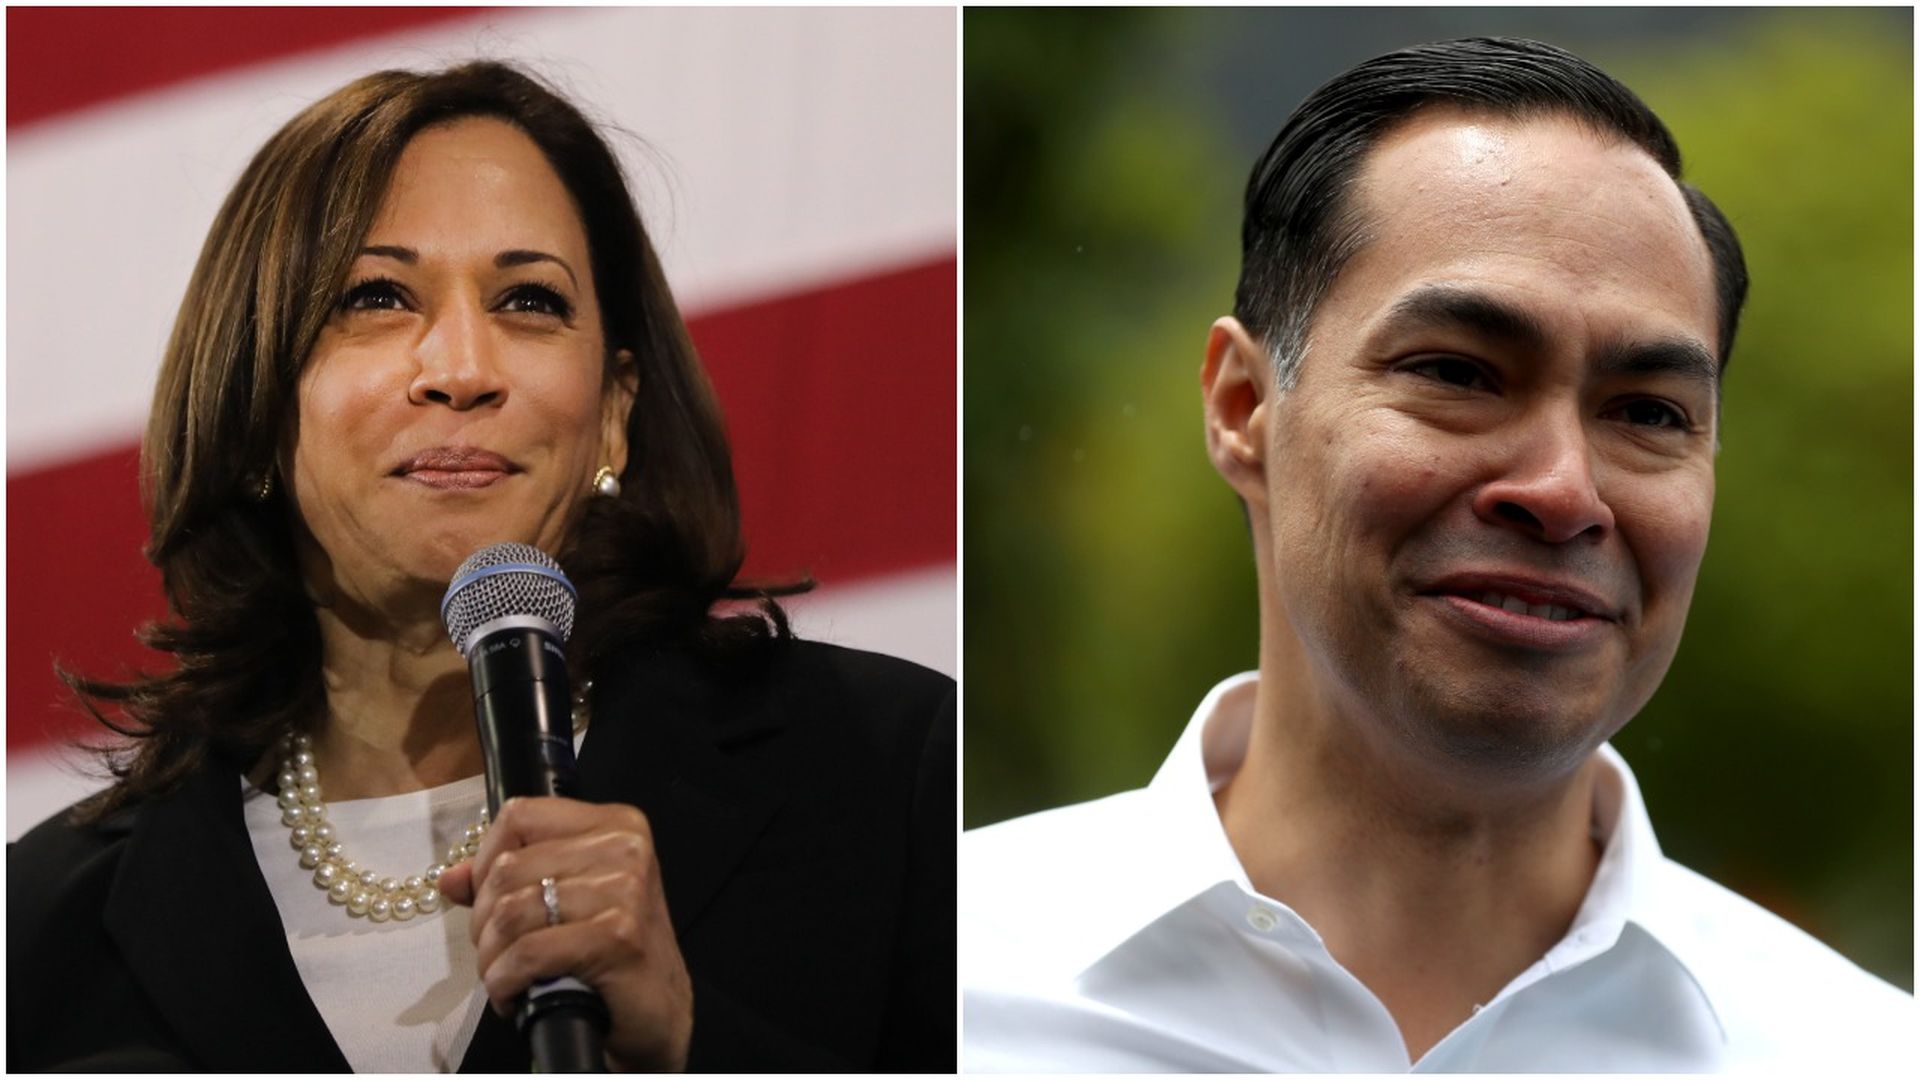 This image is a two-way split screen between Kamala Harris and Julian Castro.